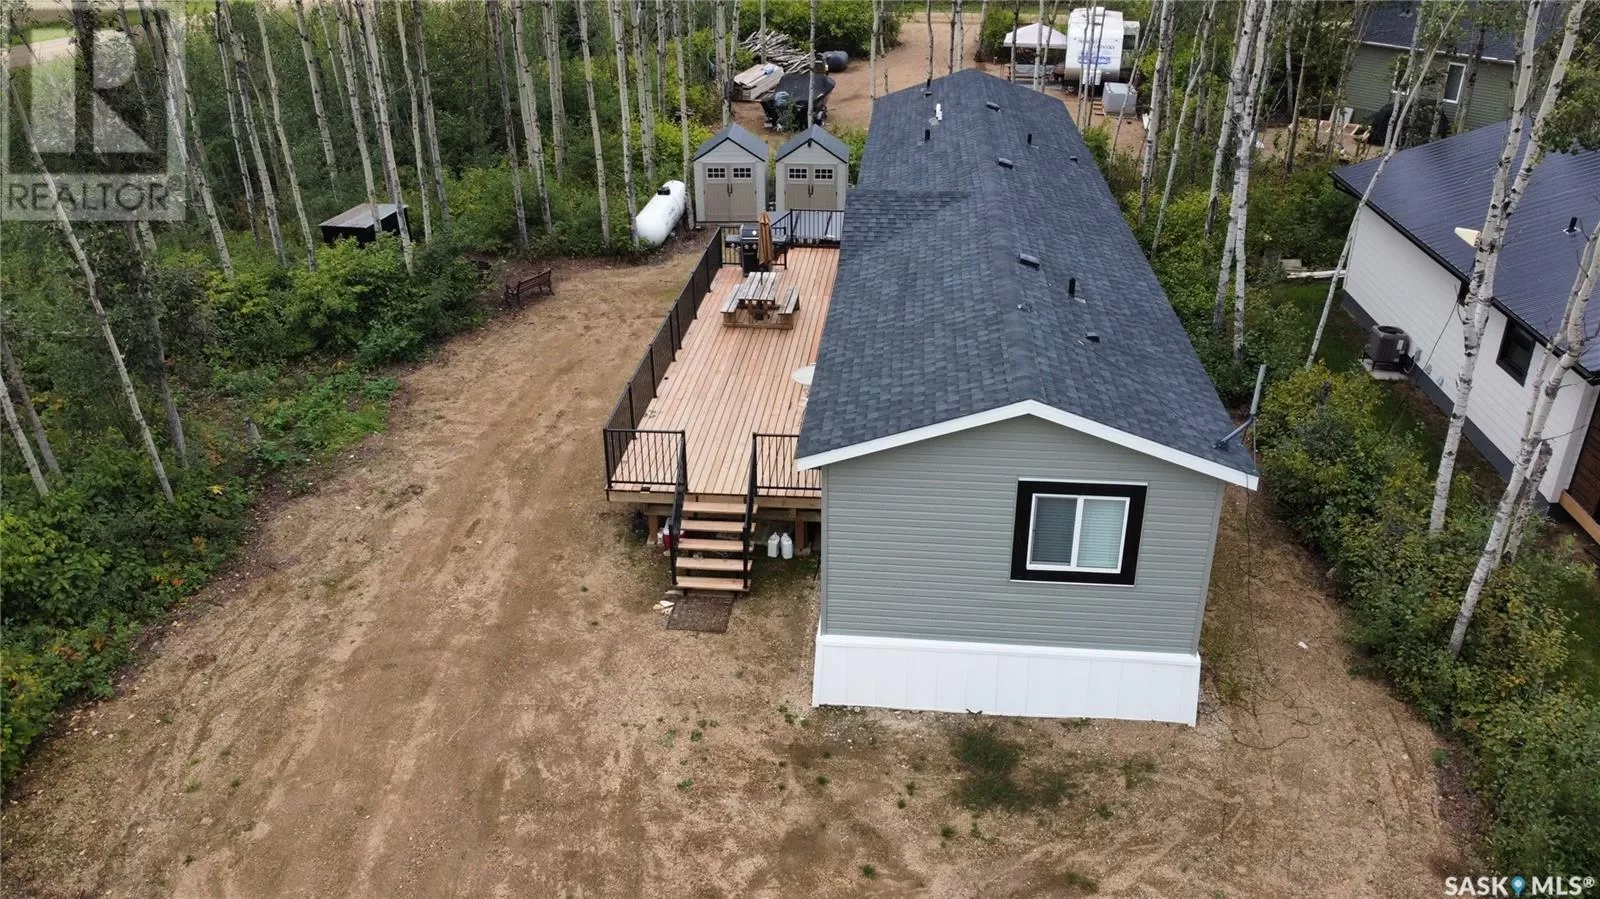 Mobile Home for rent: Barrier Lakeview Resort, Barrier Valley Rm No. 397, Saskatchewan S0E 0B0